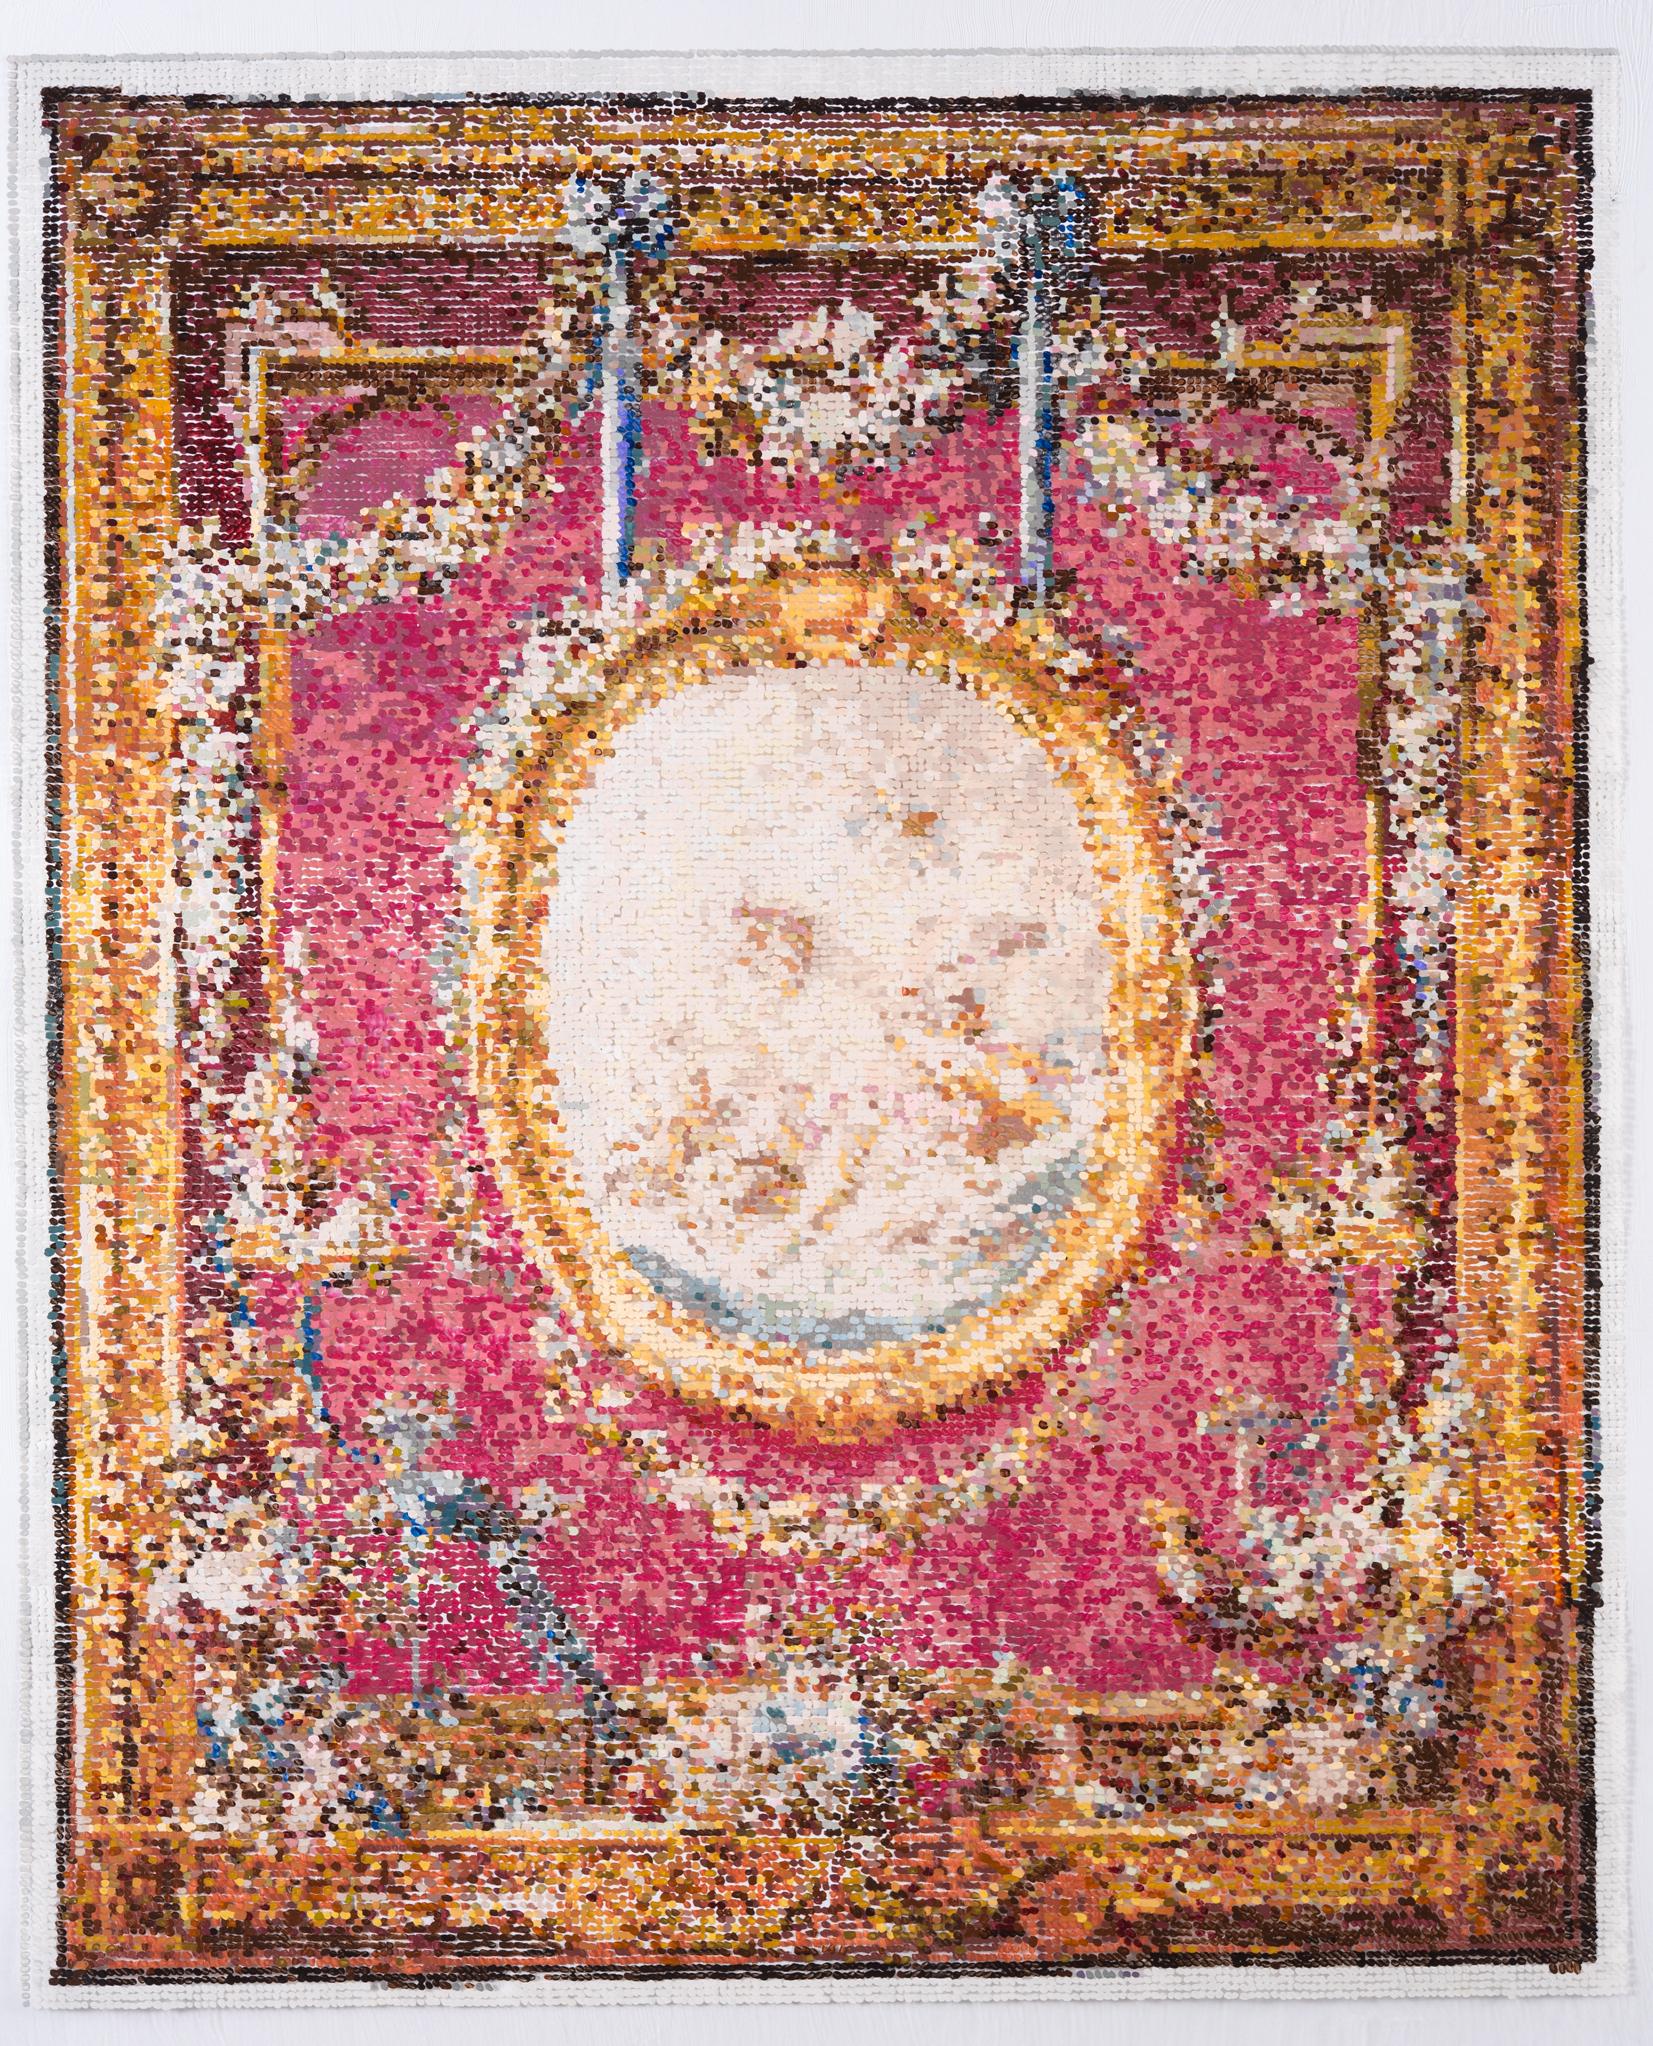 After French Tapestry, Embroidery Painting, Brick Red, Gold, Ivory, Cherubs